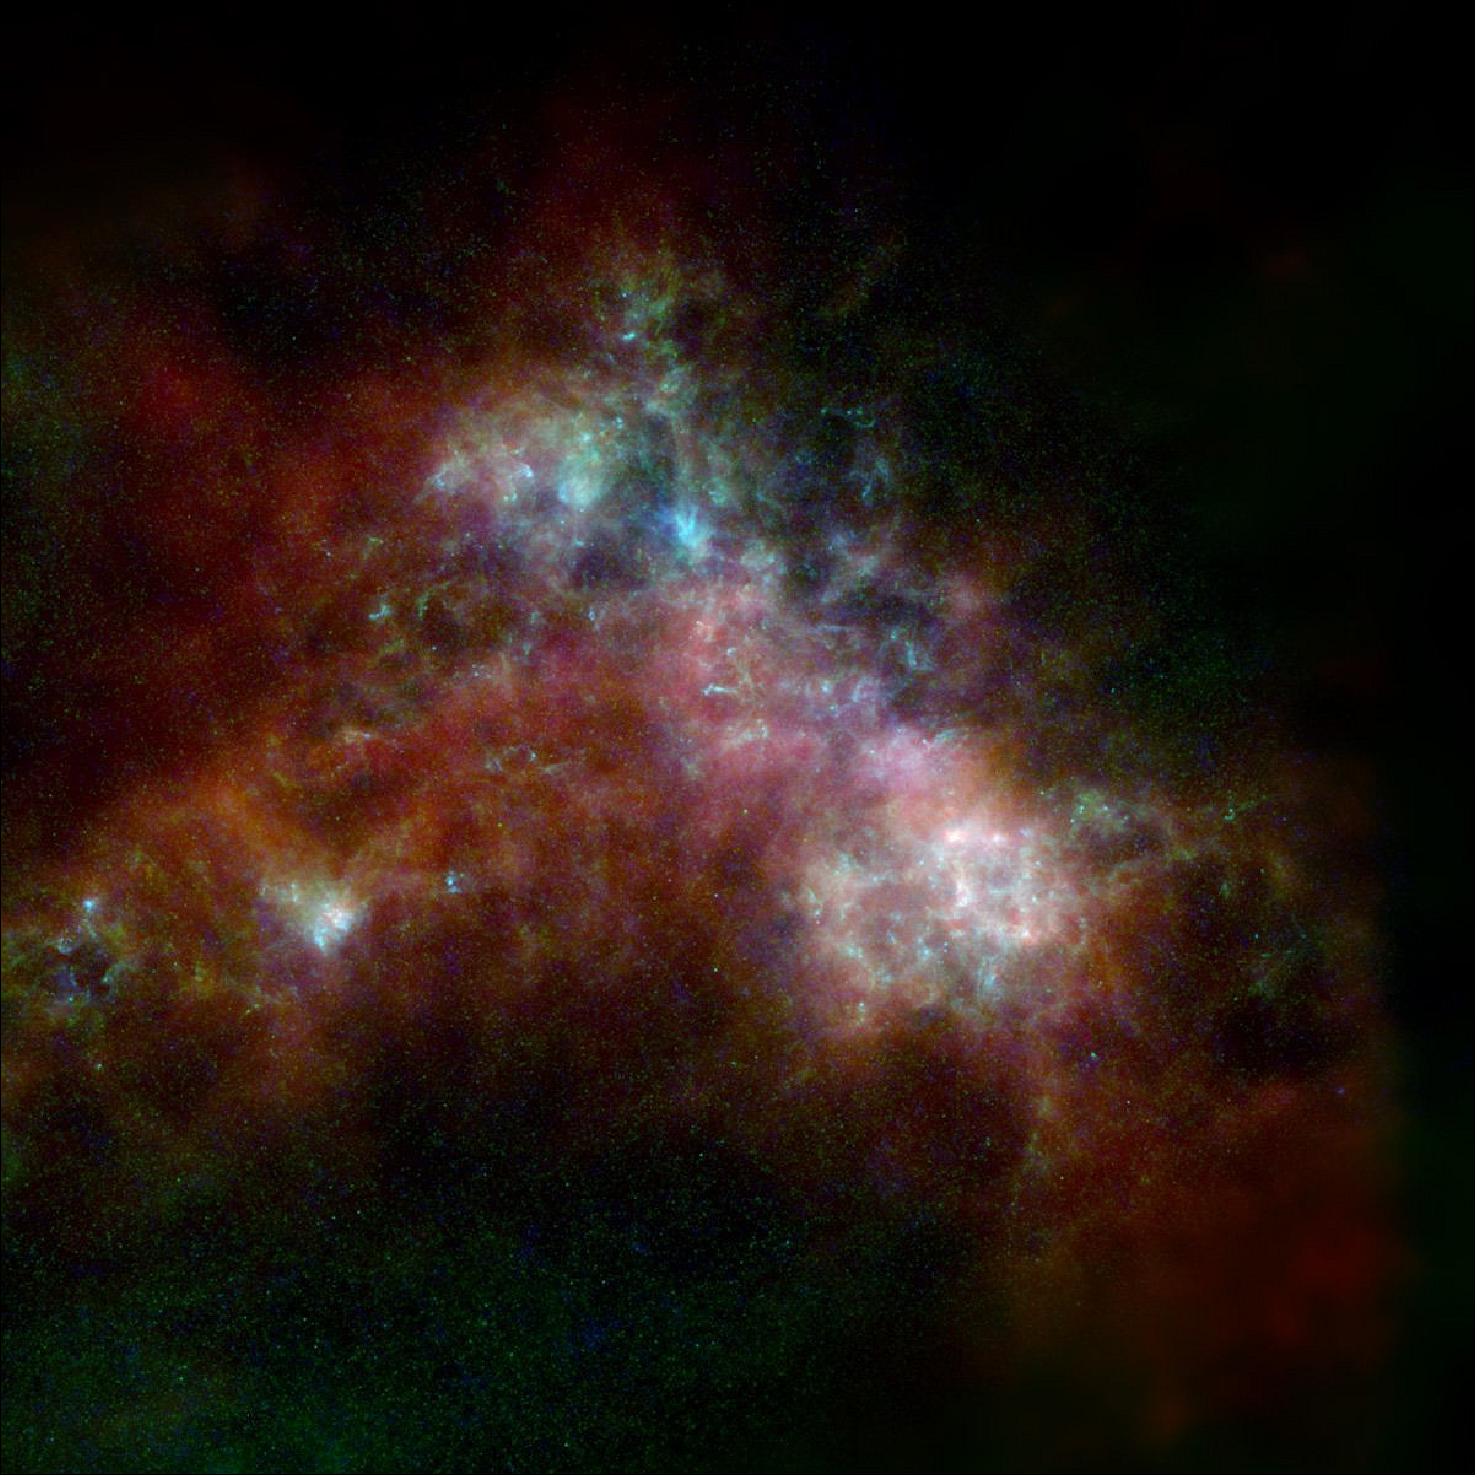 Figure 16: The Small Magellanic Cloud is a satellite of the Milky Way, containing about 3 billion stars. This far-infrared and radio view of it shows the cool (green) and warm (blue) dust, as well as the hydrogen gas (red) [image credit: ESA/NASA/JPL-Caltech/CSIRO/NANTEN2/C. Clark (STScI)]